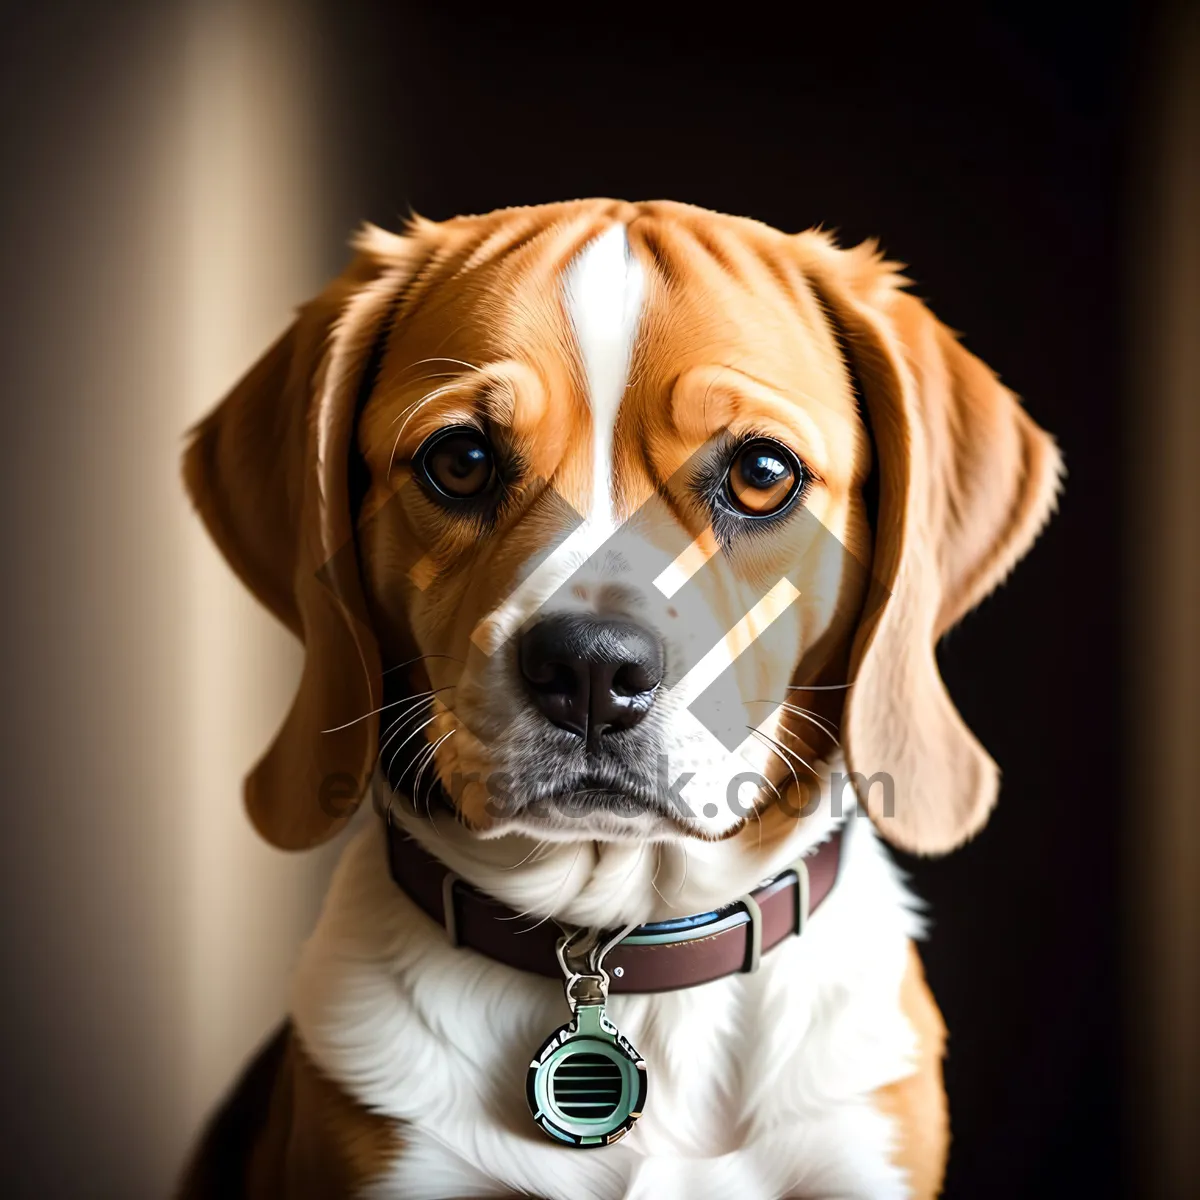 Picture of Purebred Beagle Pup: Studio Portrait of an Adorable Hunting Dog